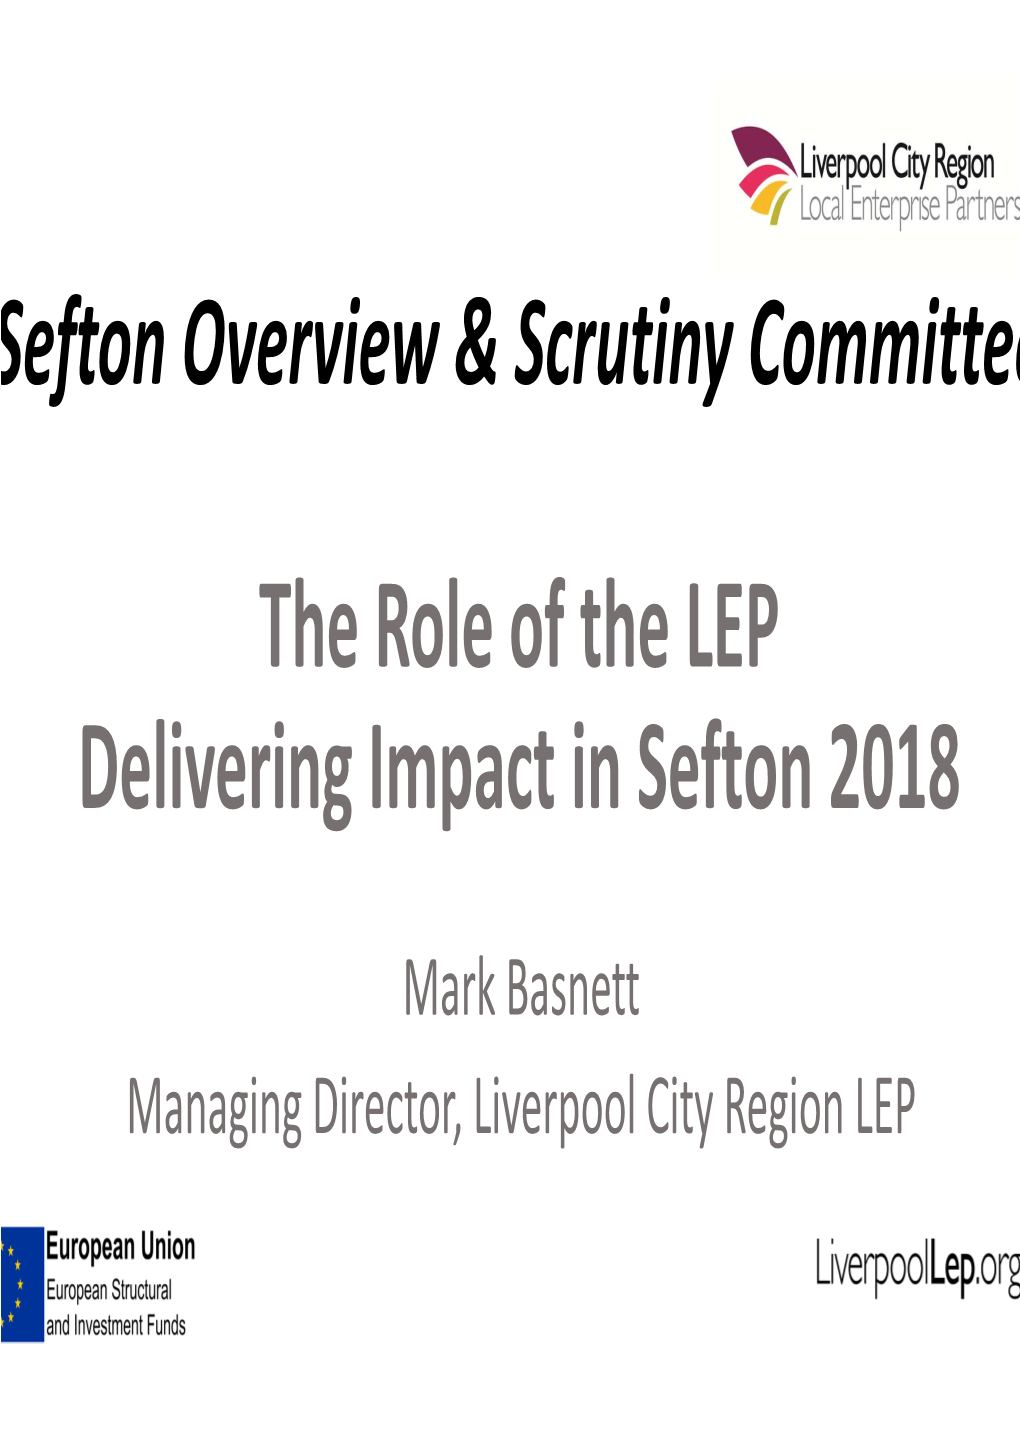 Sefton Overview & Scrutiny Committee the Role of the LEP Delivering